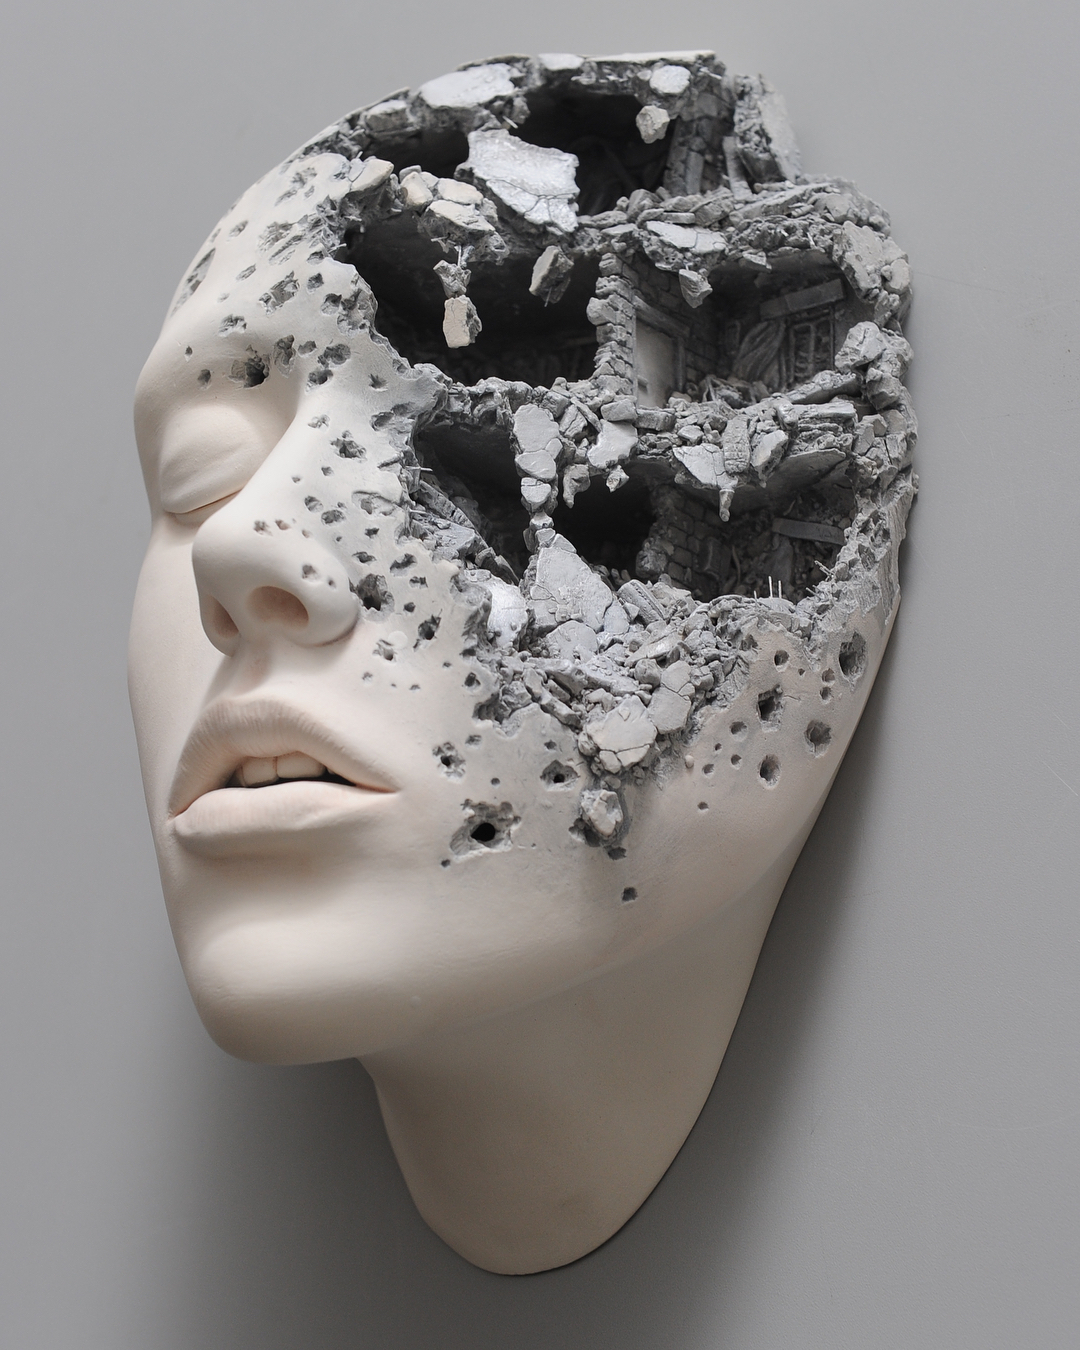 Spectacular Ceramic Sculptures of the Human Faces by Johnson Tsangs